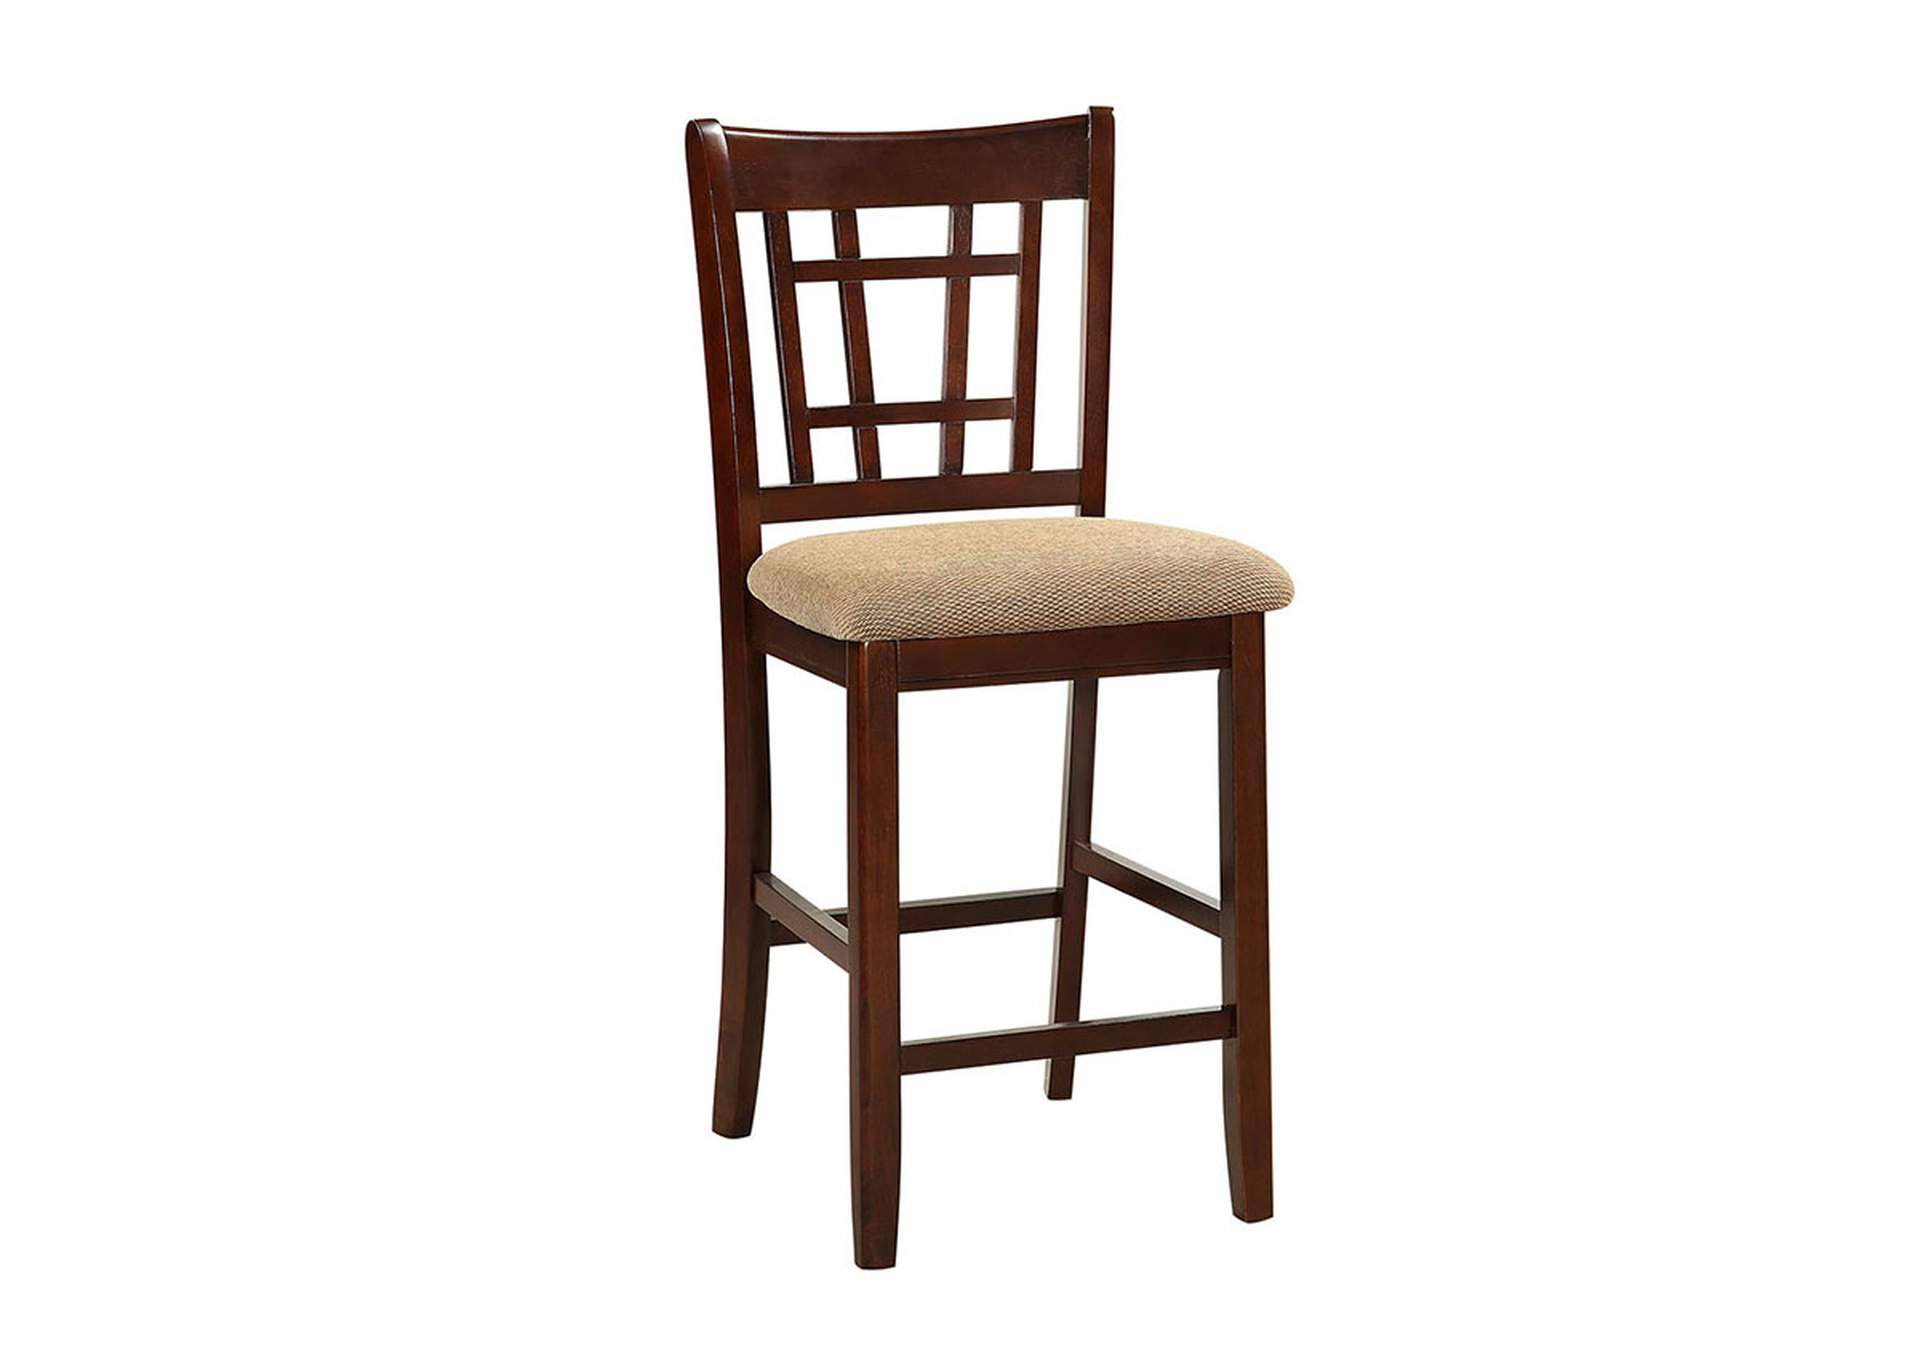 Dining High Chair,Poundex